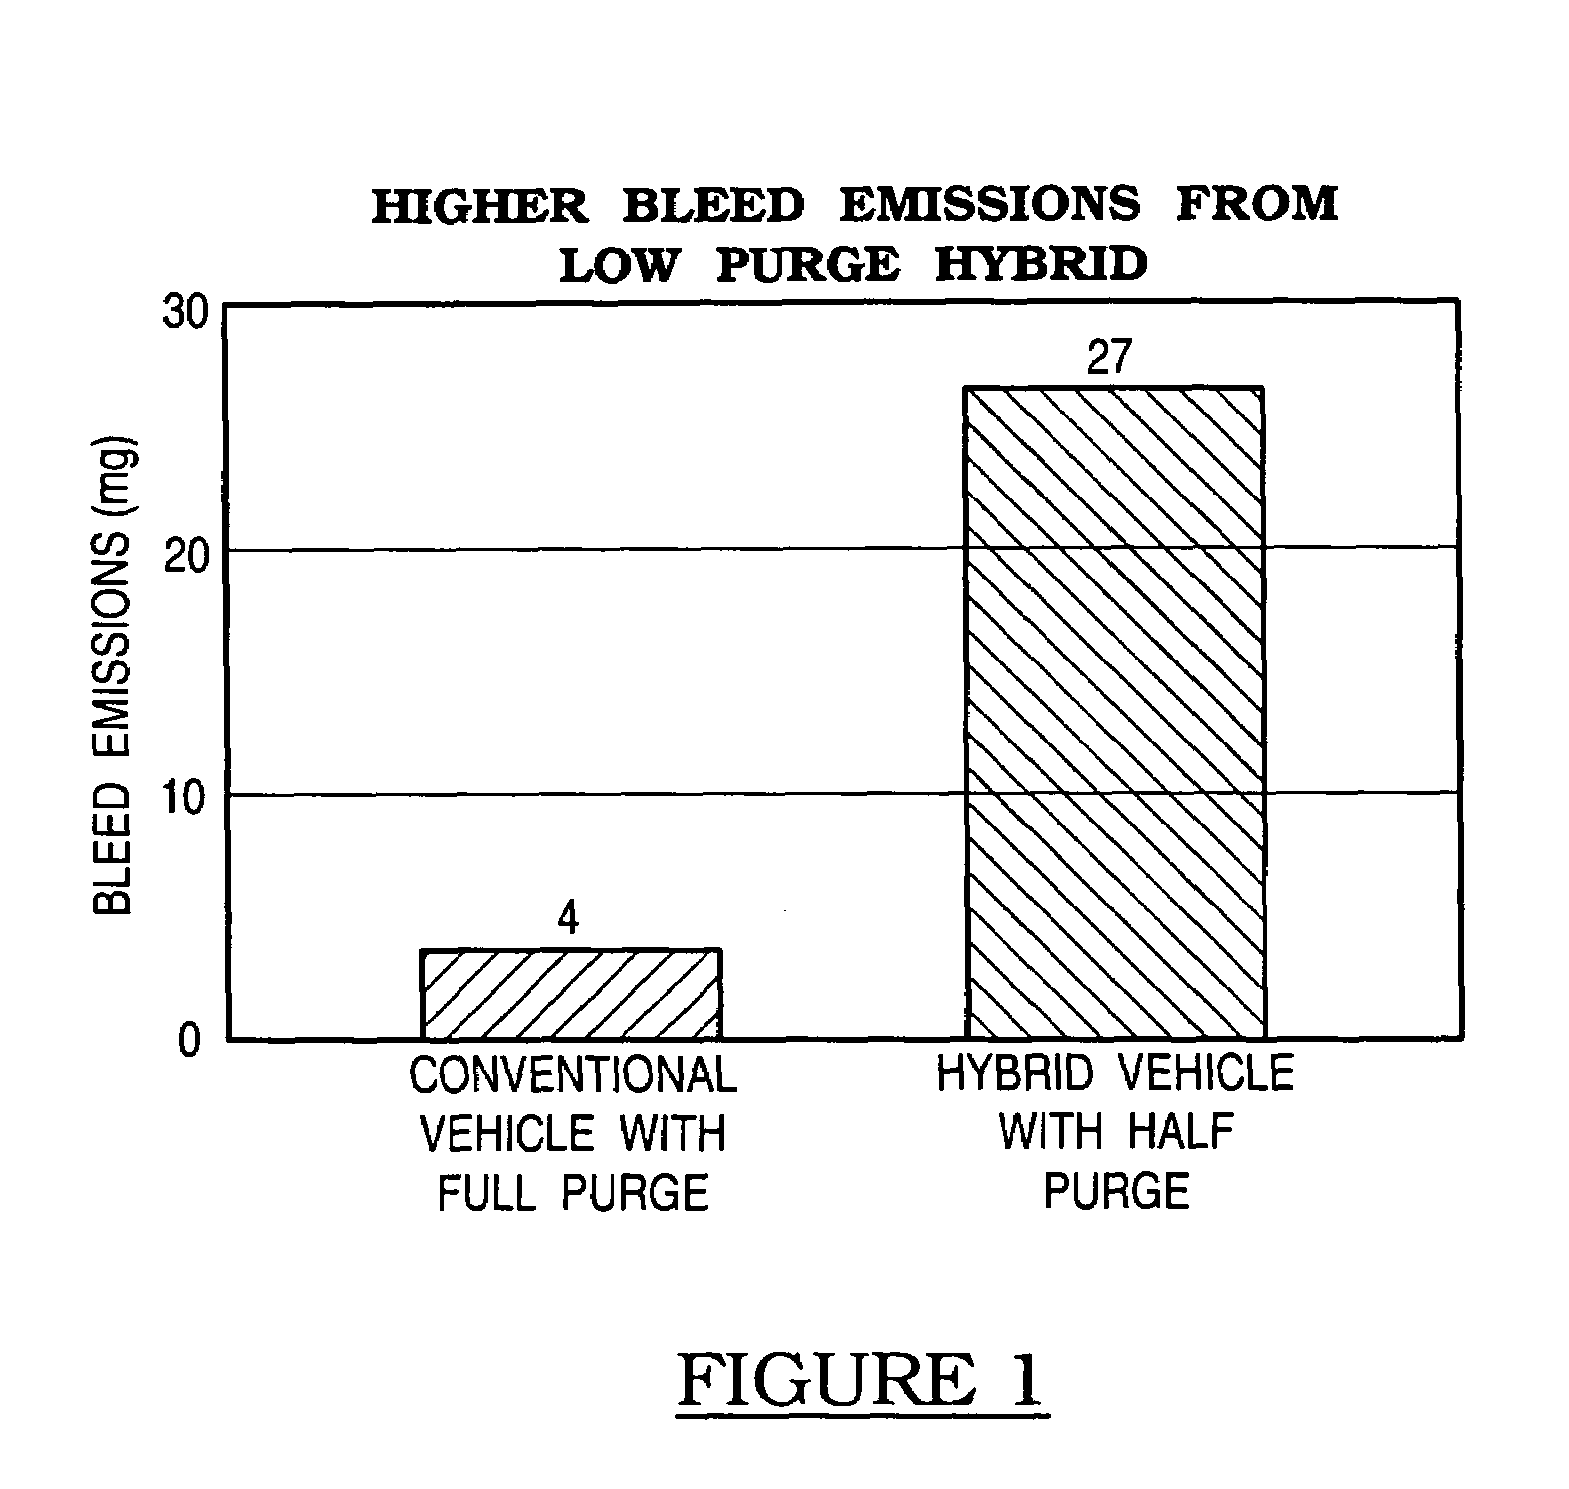 Method and system of evaporative emission control for hybrid vehicle using activated carbon fibers